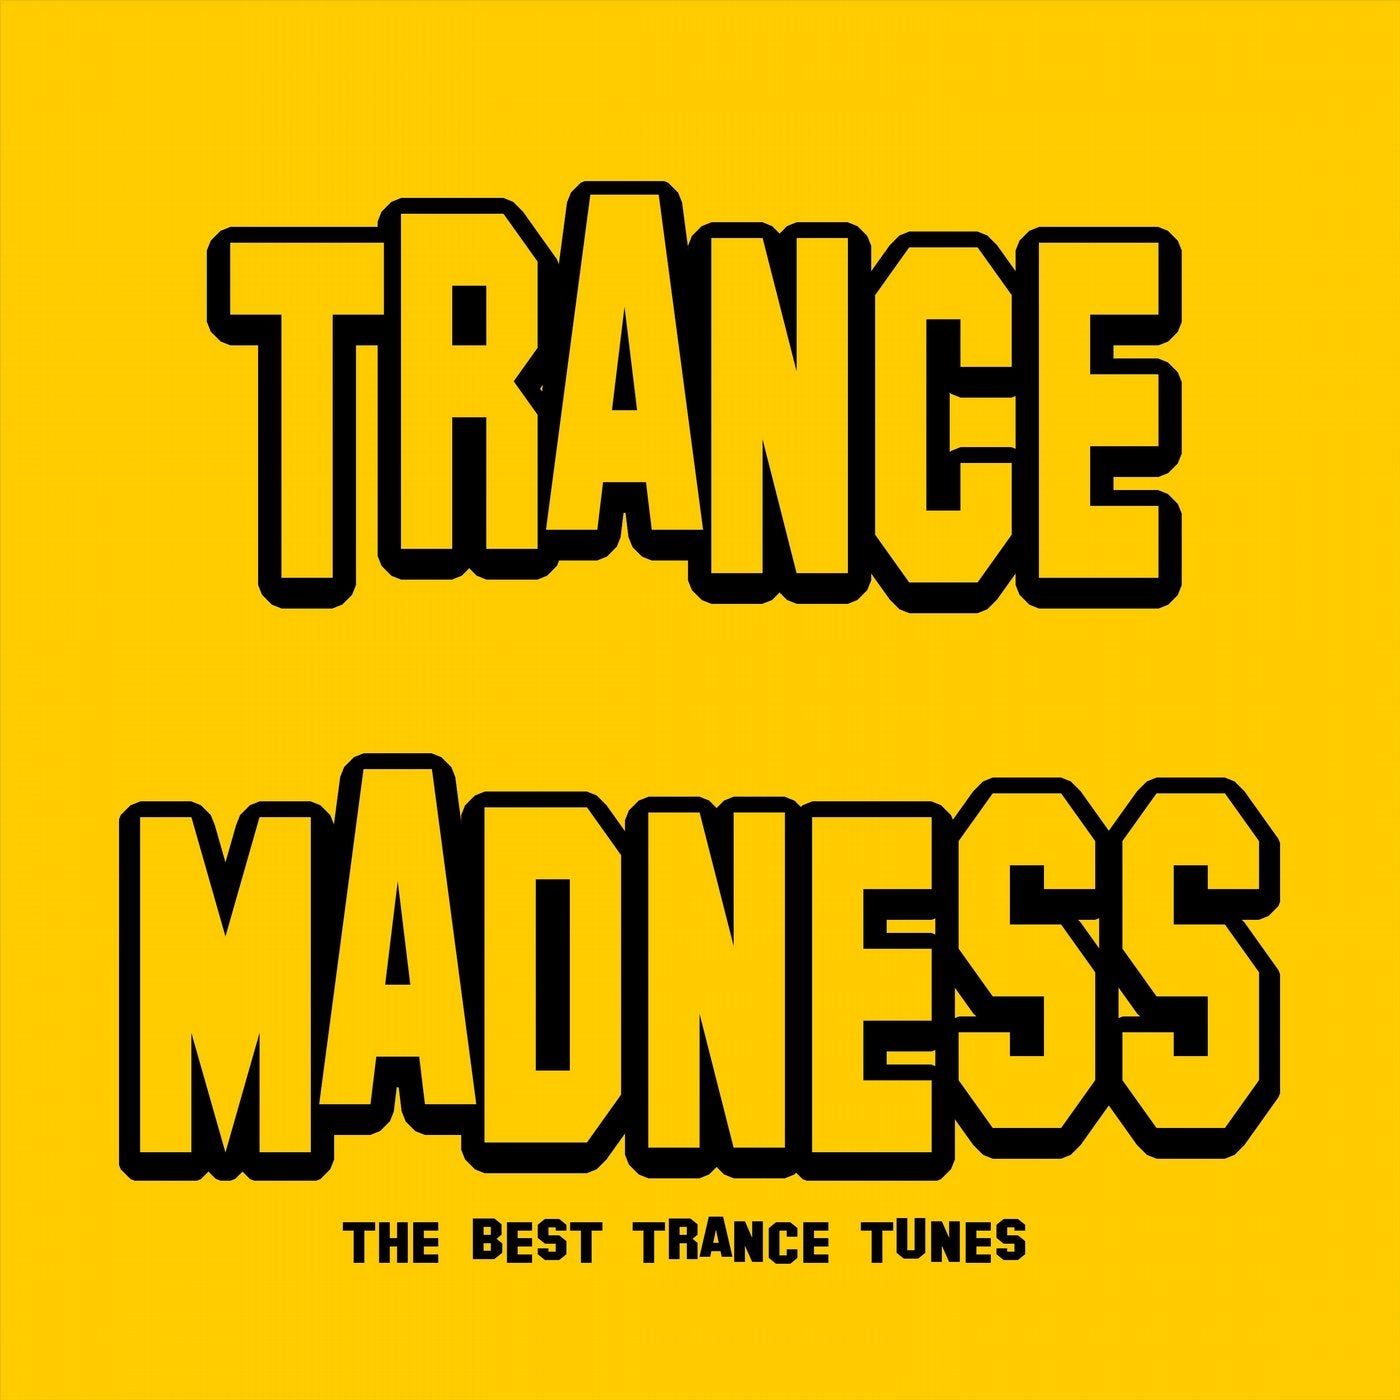 Trance Madness (The Best Trance Tunes)